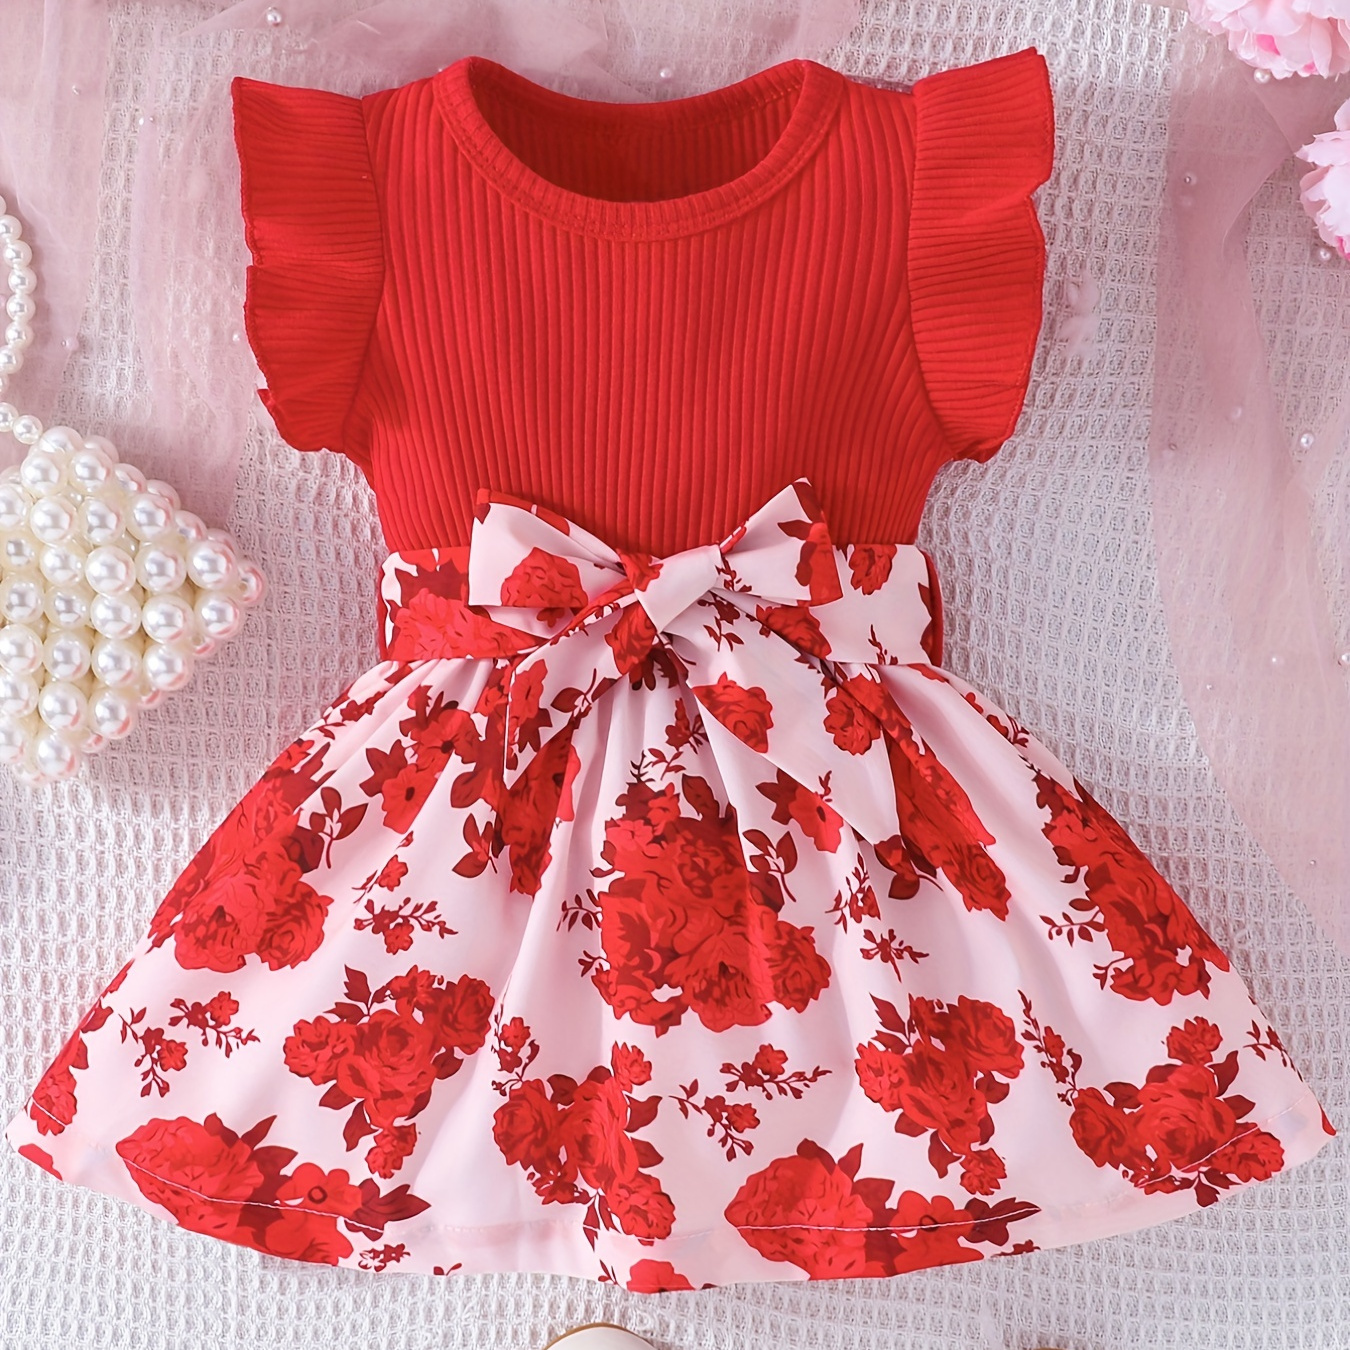 

Baby Girls Cute Rose Flowers Allover Print Dress Flutter Sleeve Baby Cotton Dresses With Belt